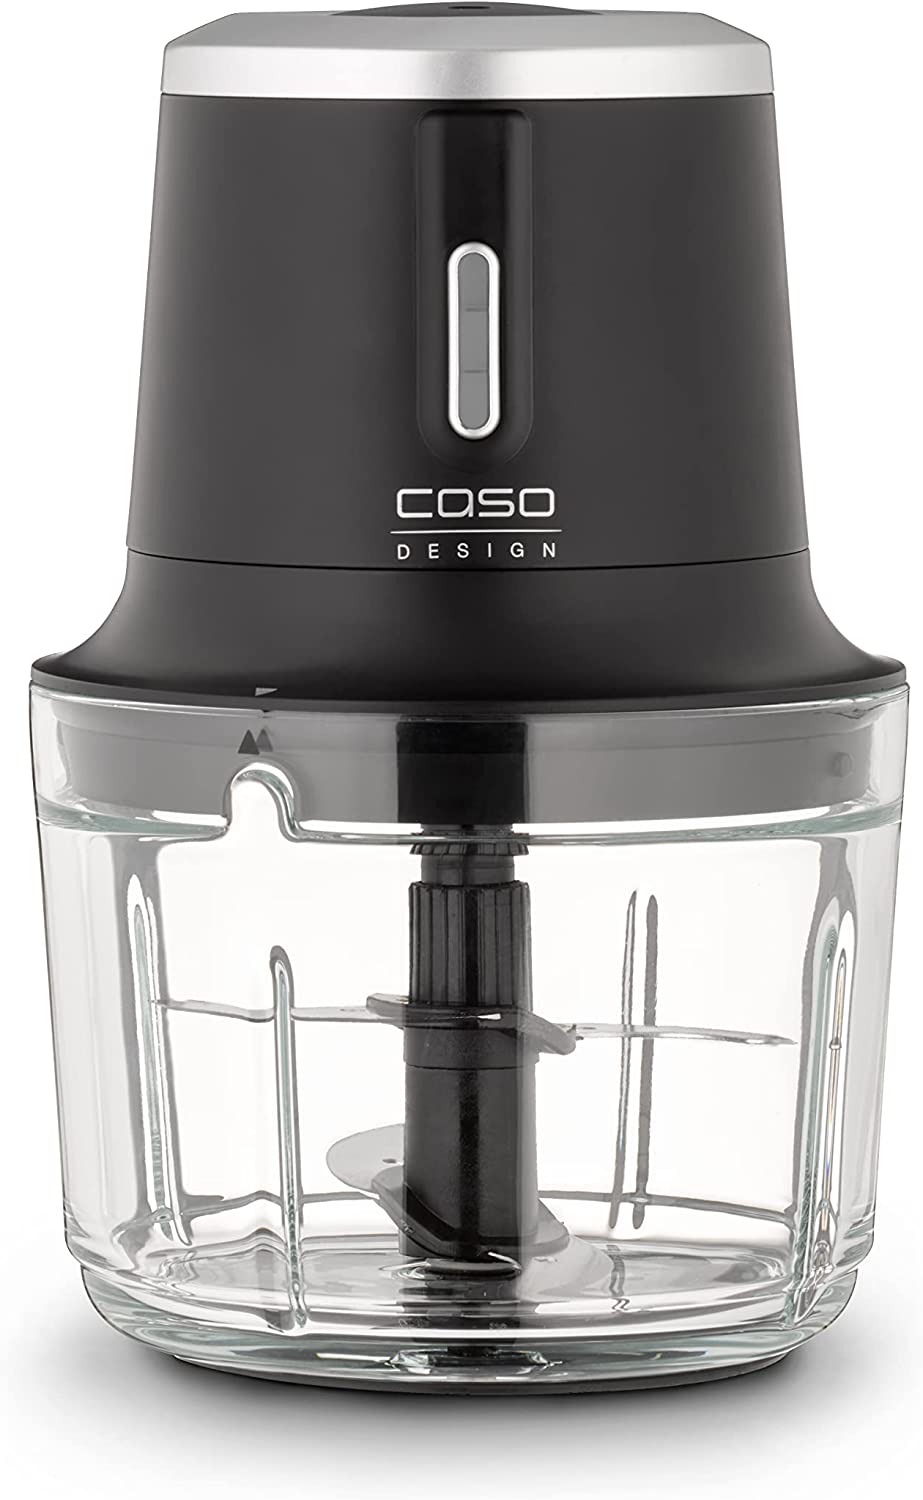 CASO Chop & Go - Wireless Design Multi Chopper with 4 Stainless Steel Blades, Flexible and Ready to Use Anywhere, Up to 60 Minutes Runtime, 2300 RPM, Versatile Accessories